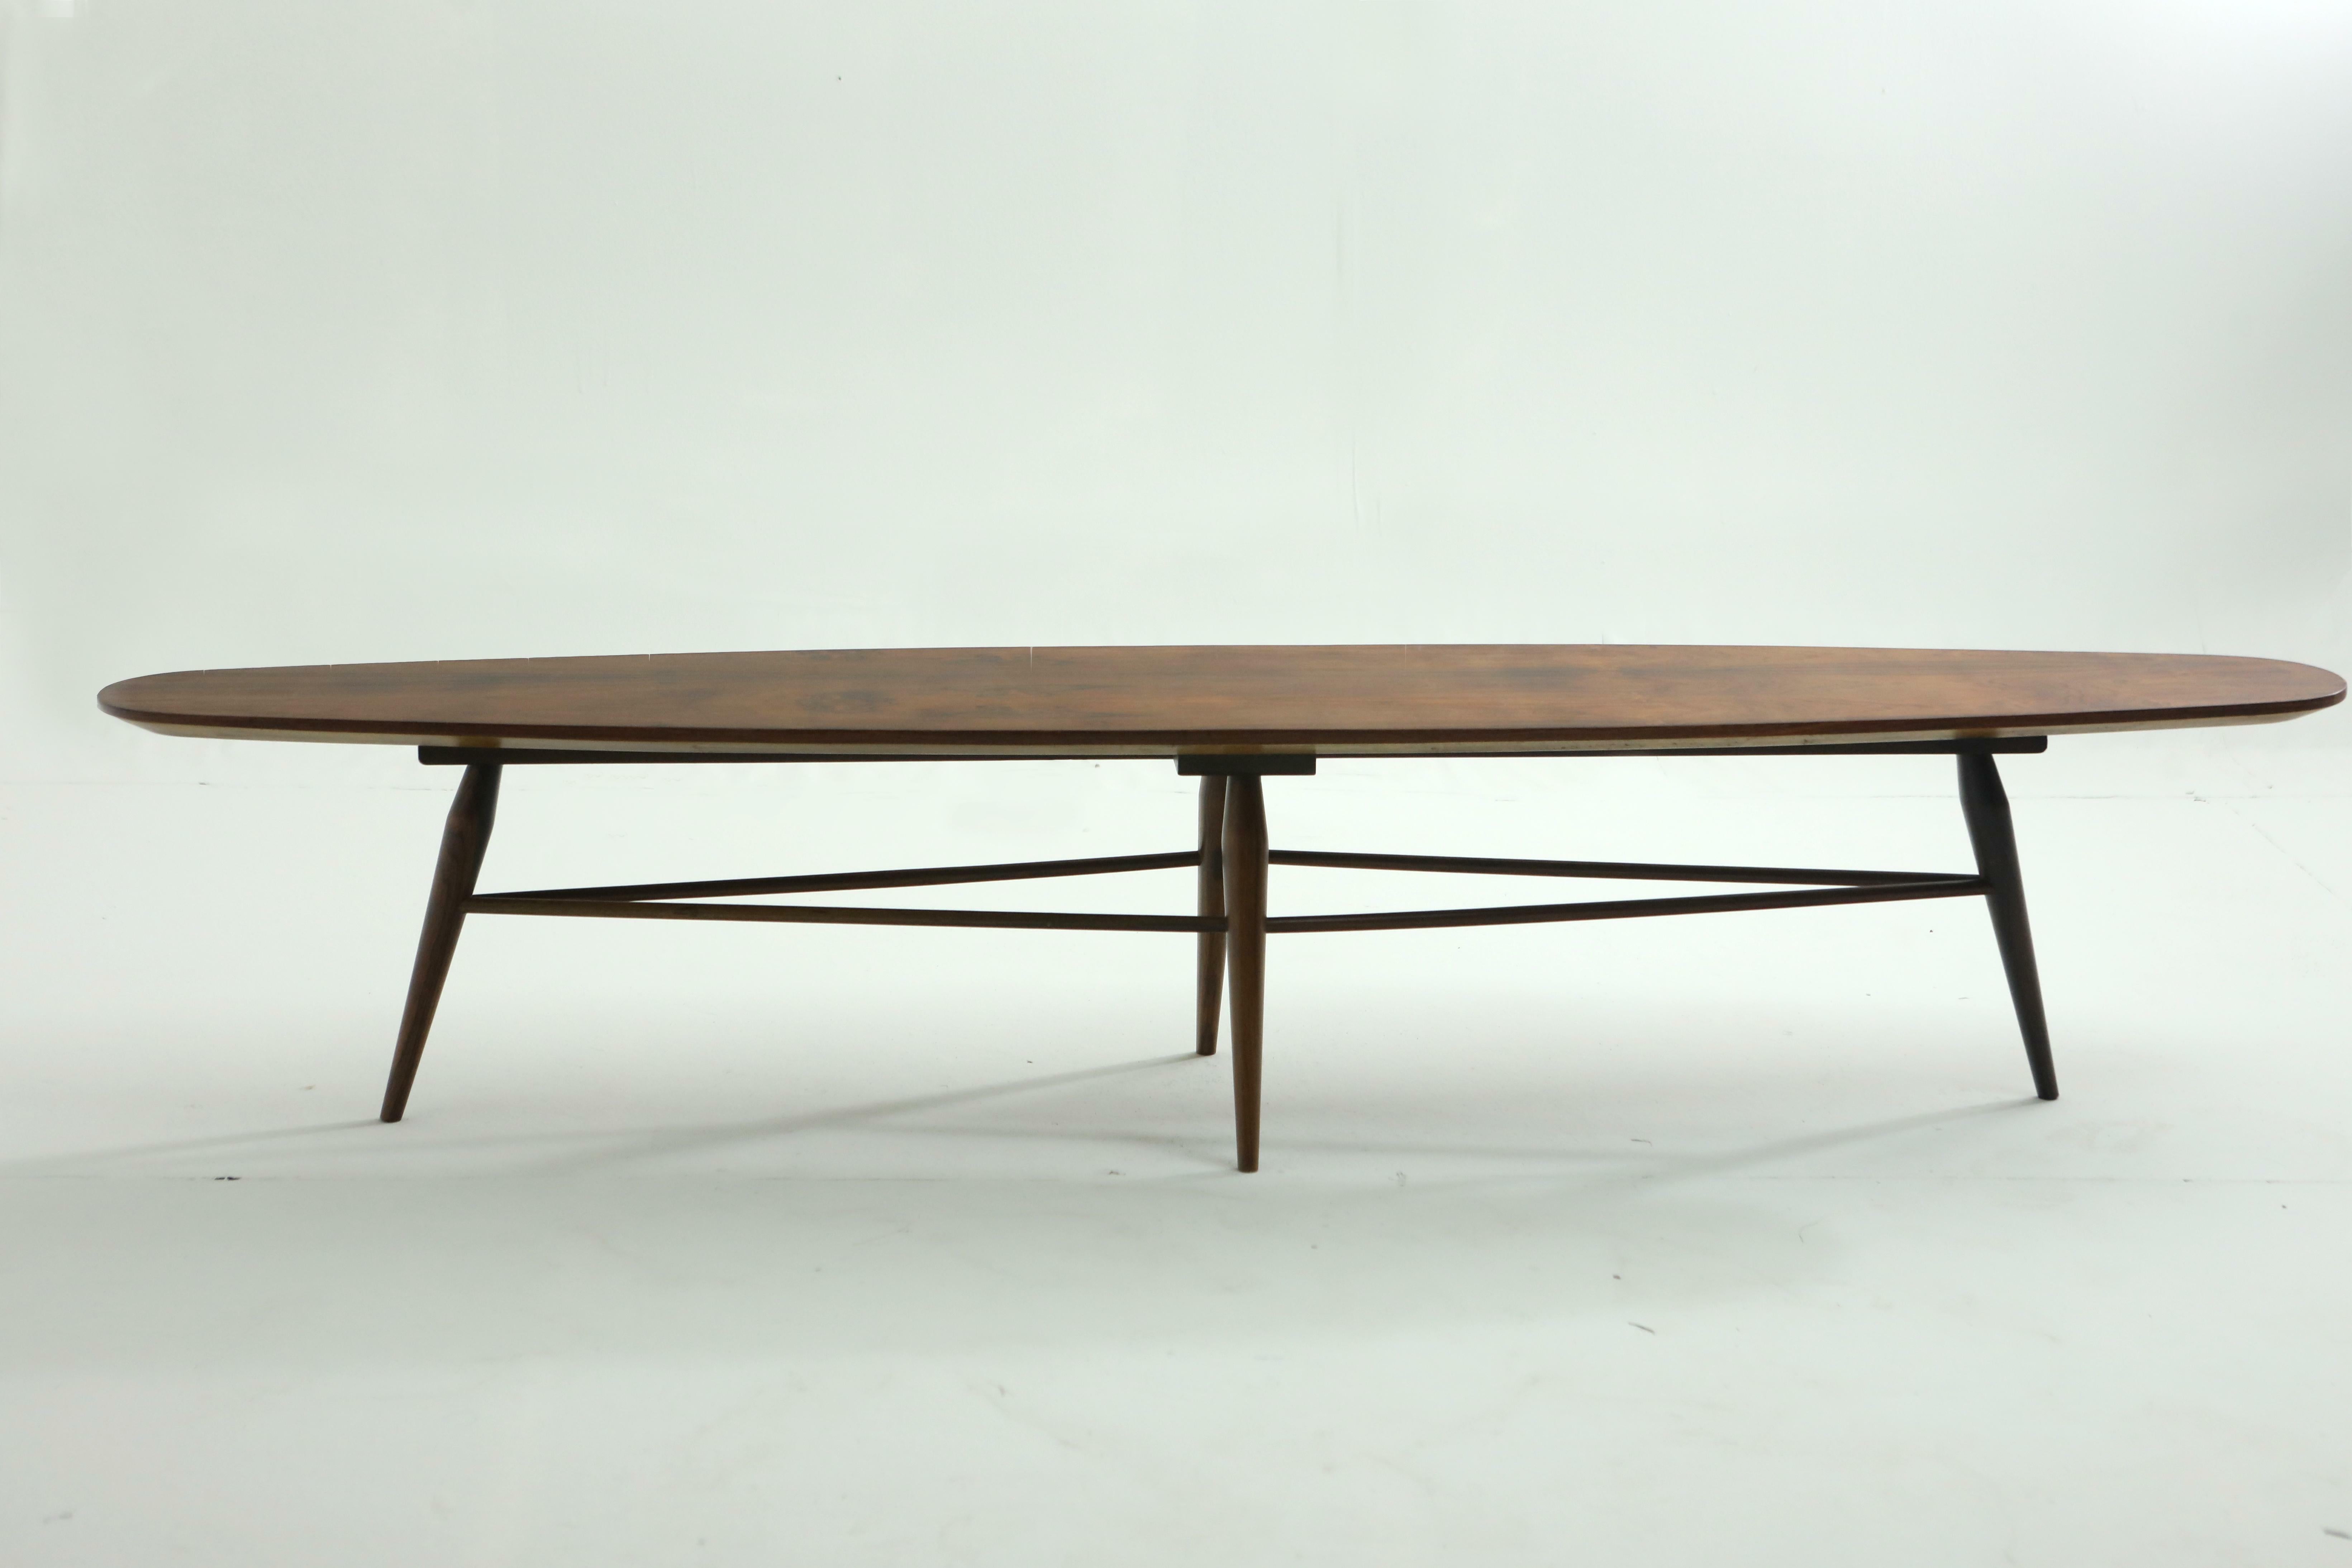 Mid-century bench by Liceu de Artes e Ofícios, Brazil, 1950s

Structured in wood with a plywood top, this versatile piece by Liceu de Artes e Ofícios can be used either as a low table or as a bench.